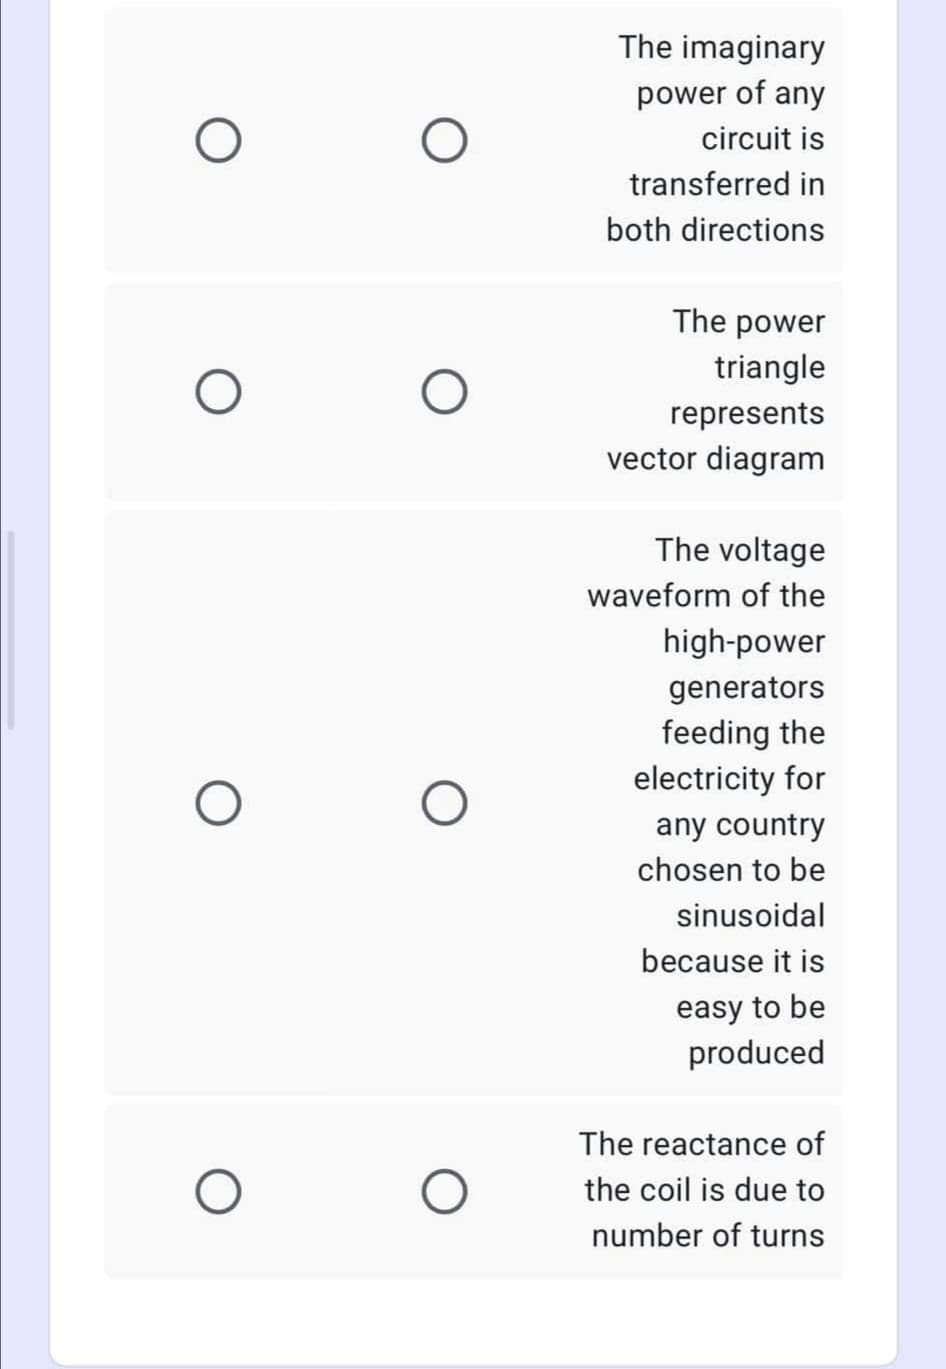 The imaginary
power of any
circuit is
transferred in
both directions
The power
triangle
represents
vector diagram
The voltage
waveform of the
high-power
generators
feeding the
electricity for
any country
chosen to be
sinusoidal
because it is
easy to be
produced
